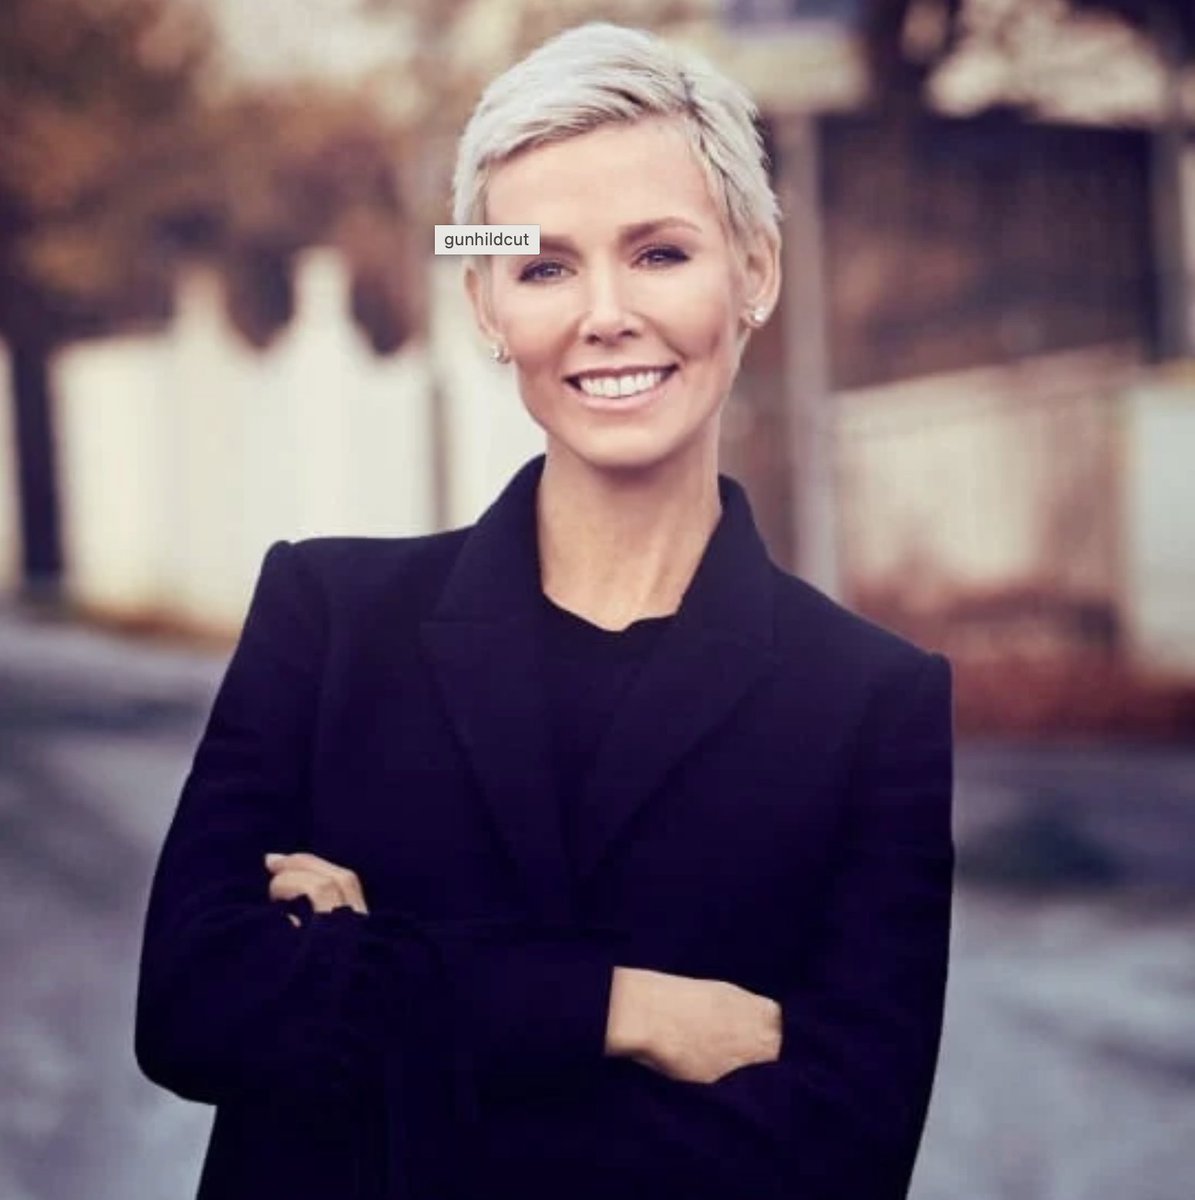 🌍 “Nobody can do everything, but everybody can do something.” Our founder and executive chair @G_Stordalen gave an interview with @UN Regional Information Center for World Health Day. ⚕👇 unric.org/en/gunhild-a-s…